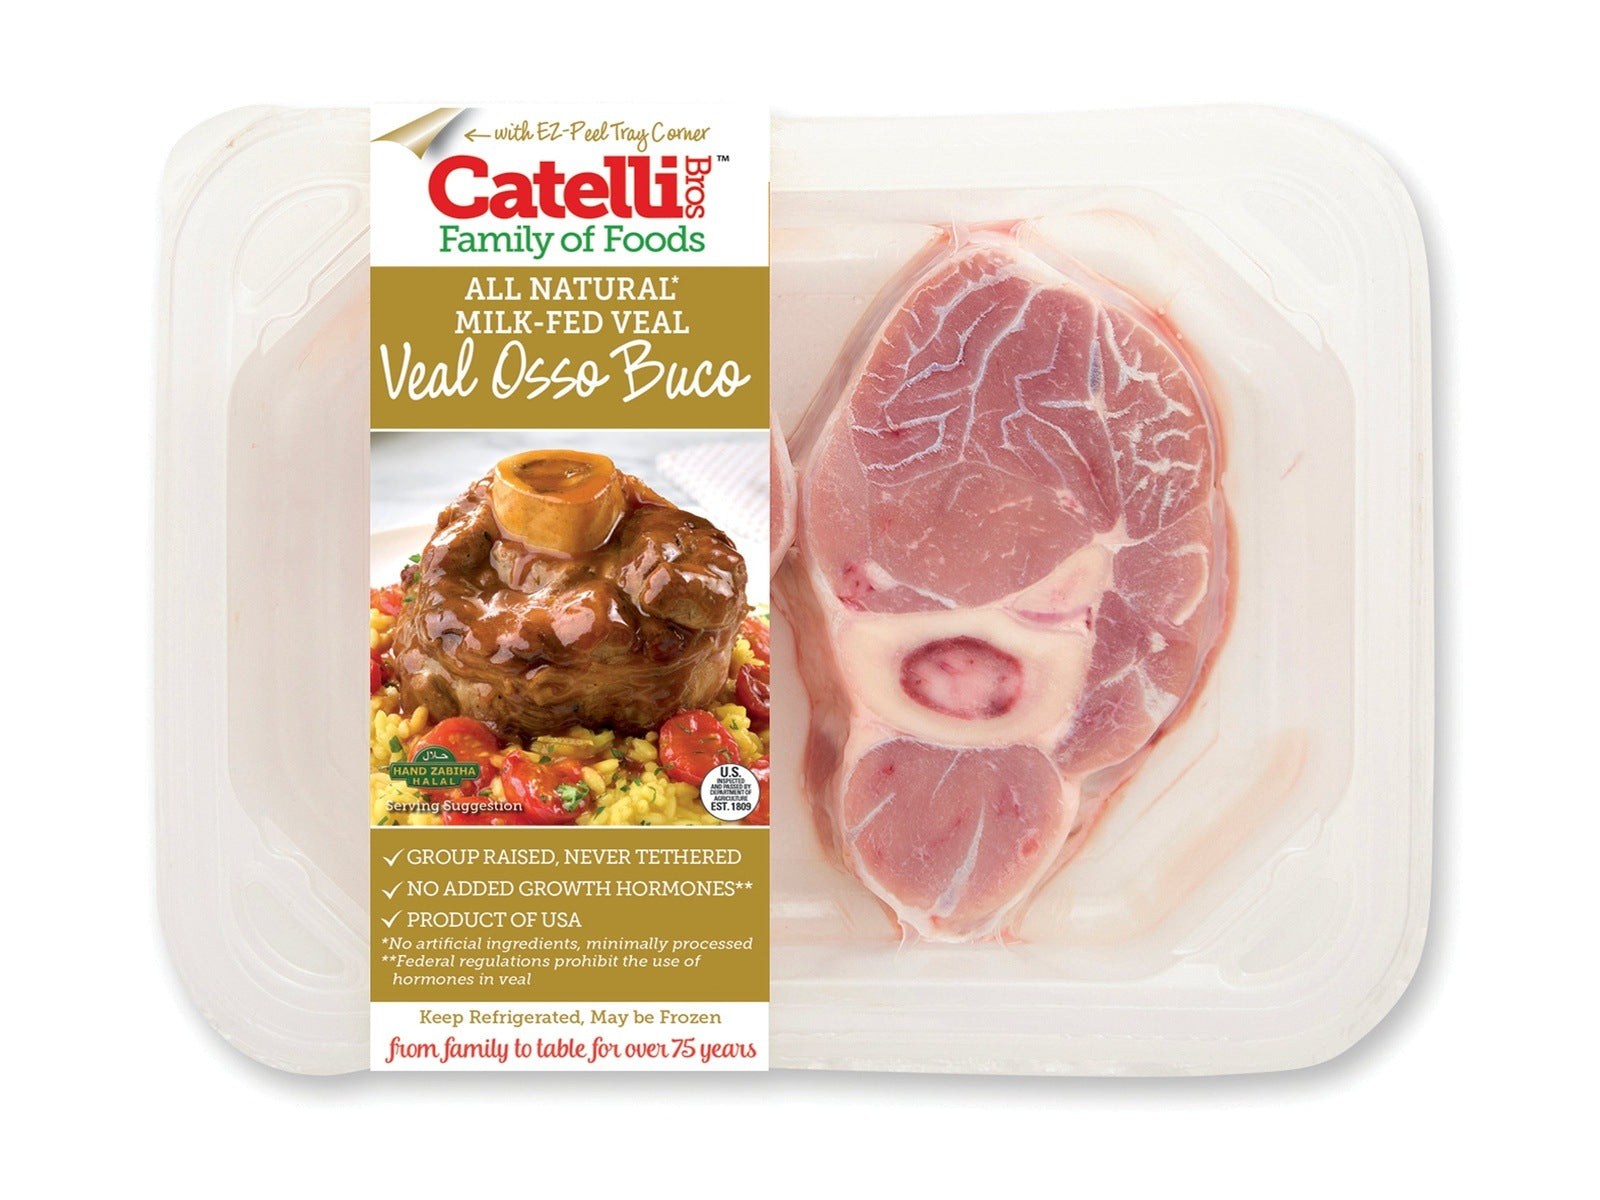 Catelli Veal Osso Bucco